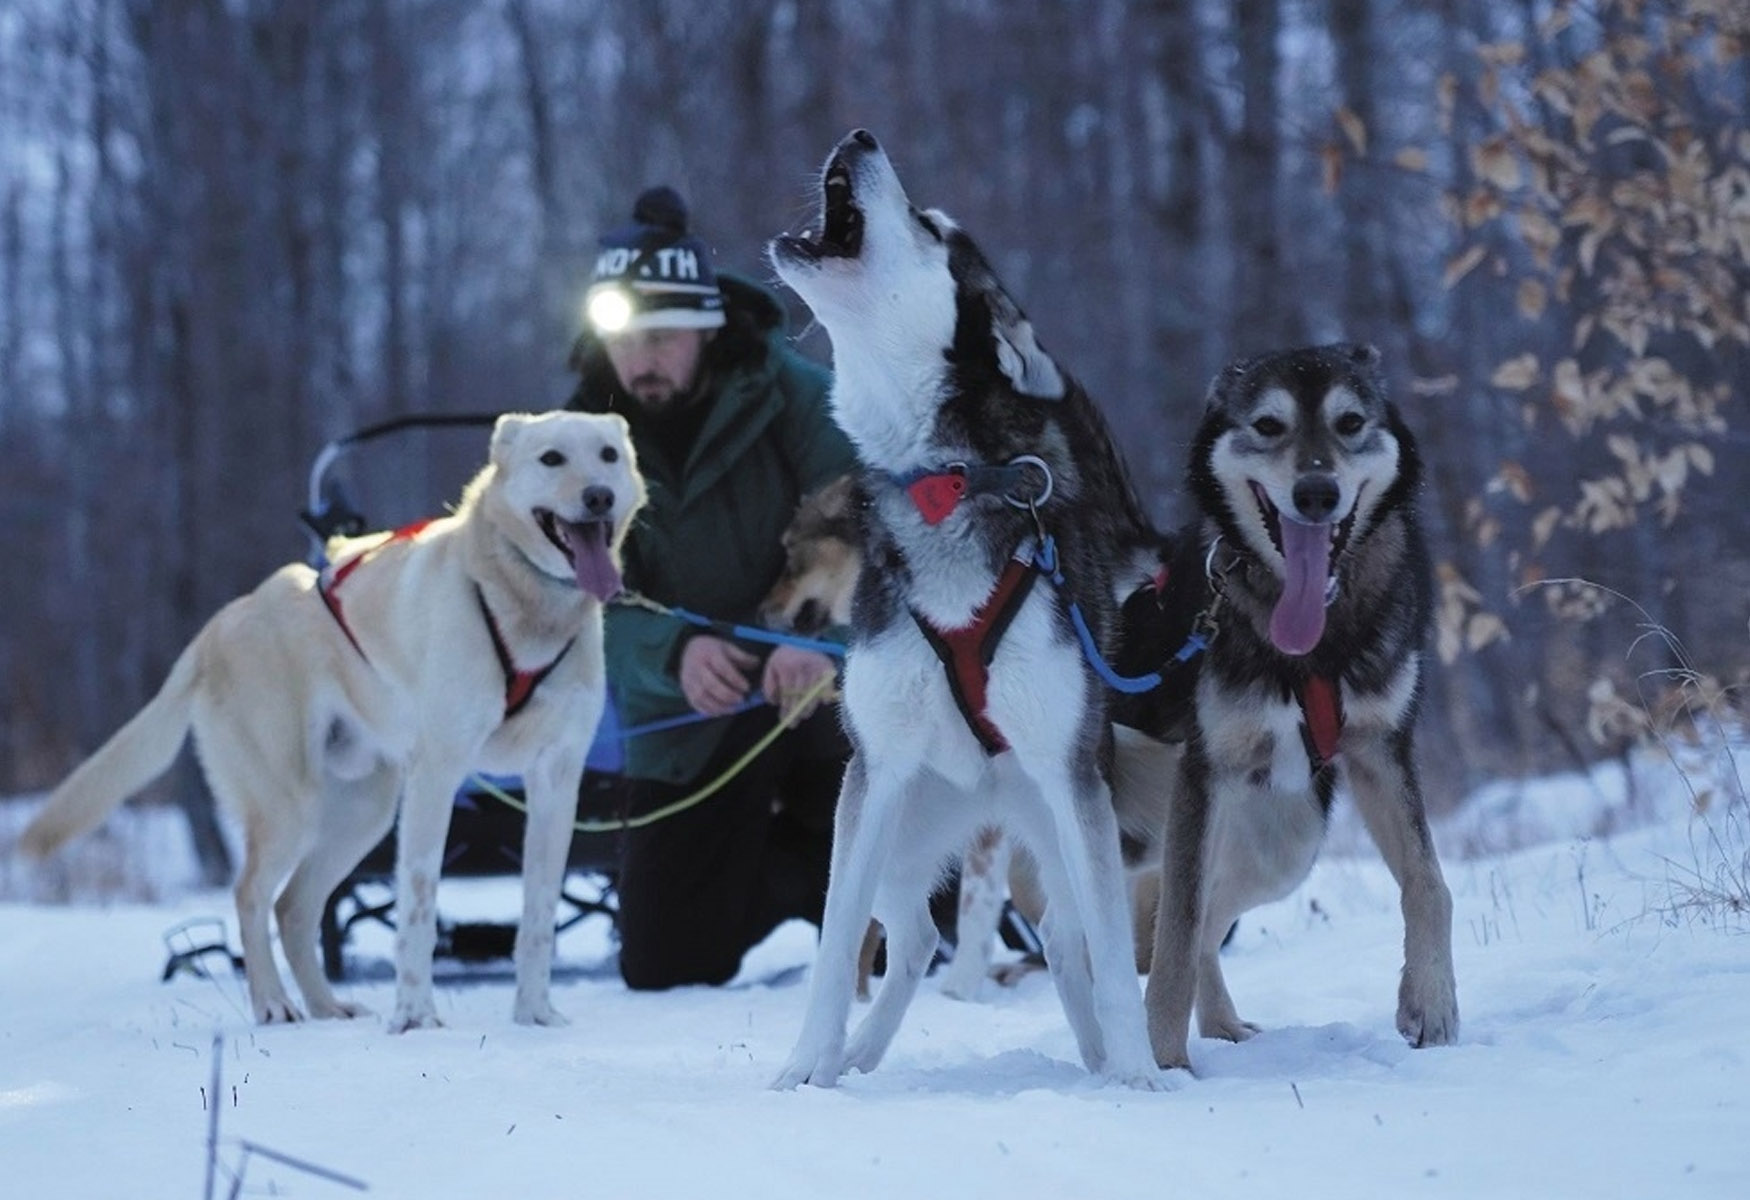 The Misconceptions Of Dogsledding